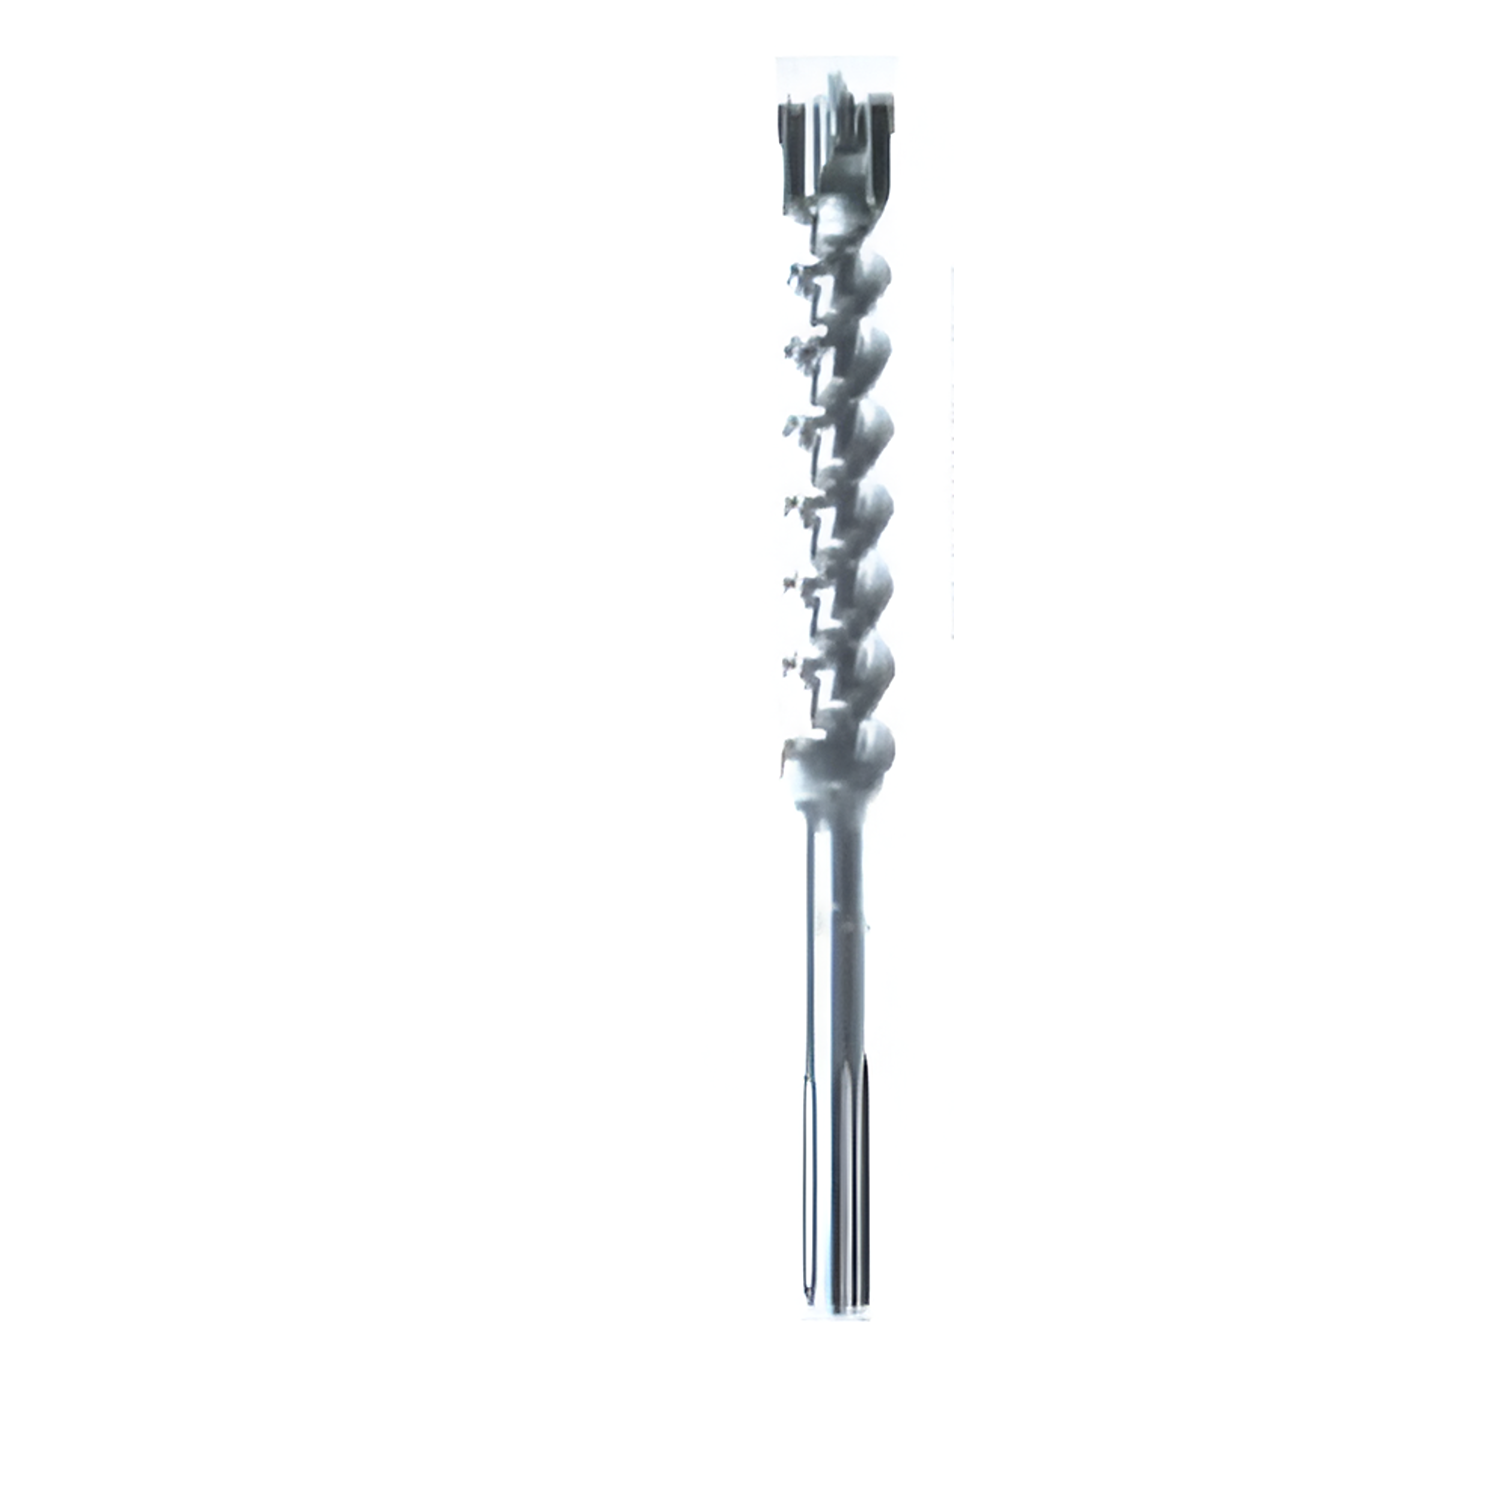 YEW AIK Hammer Drill Bit 4-Cutter Head with Double Flute Design - Premium Hammer Drill Bit from YEW AIK - Shop now at Yew Aik.